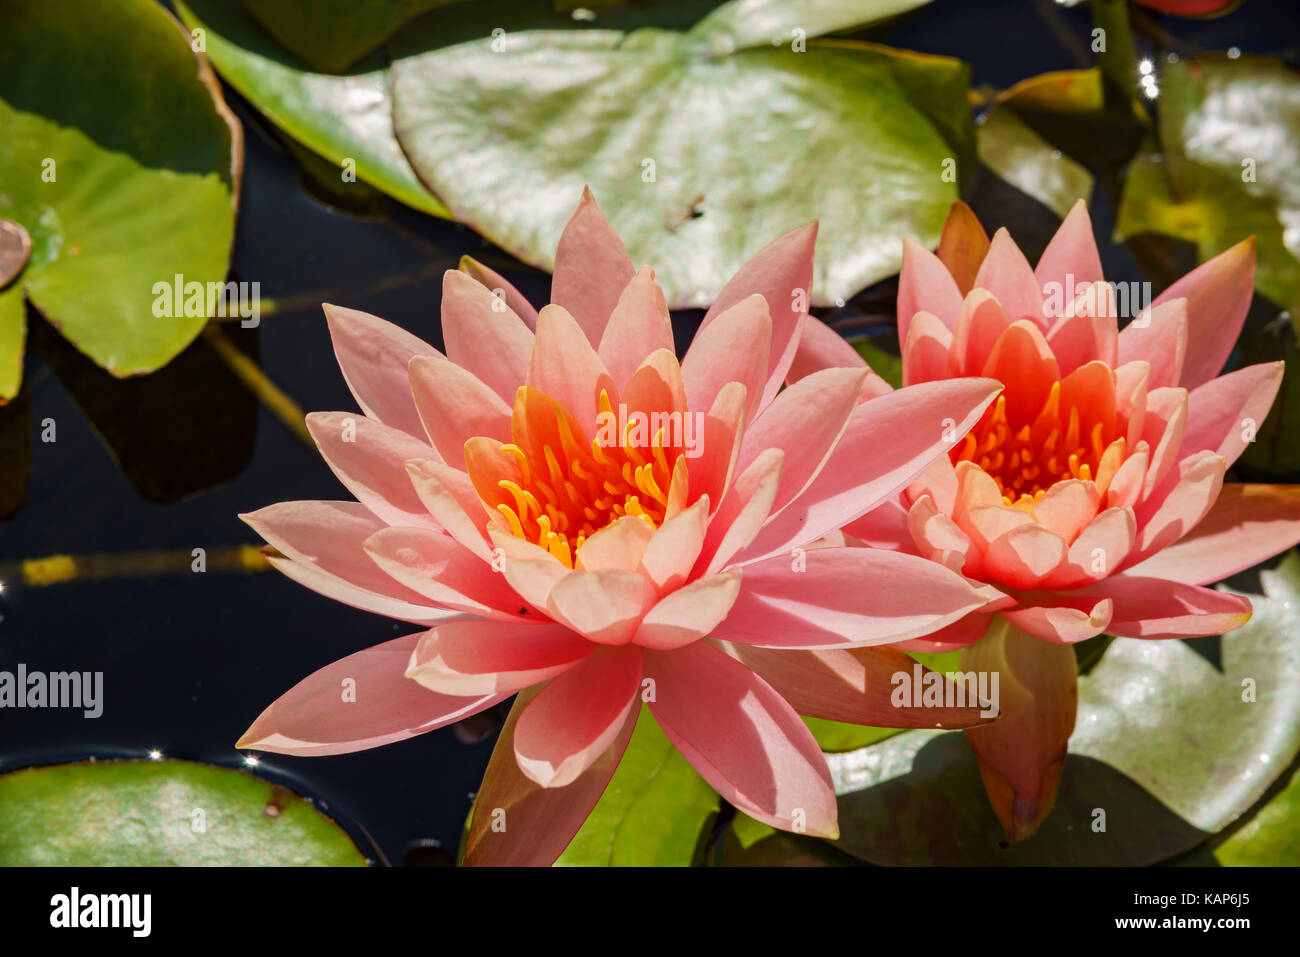 Close up shot of Water Lilies blossom, photo taken at Santa Monica, Los Angeles County, California, United States Stock Photo